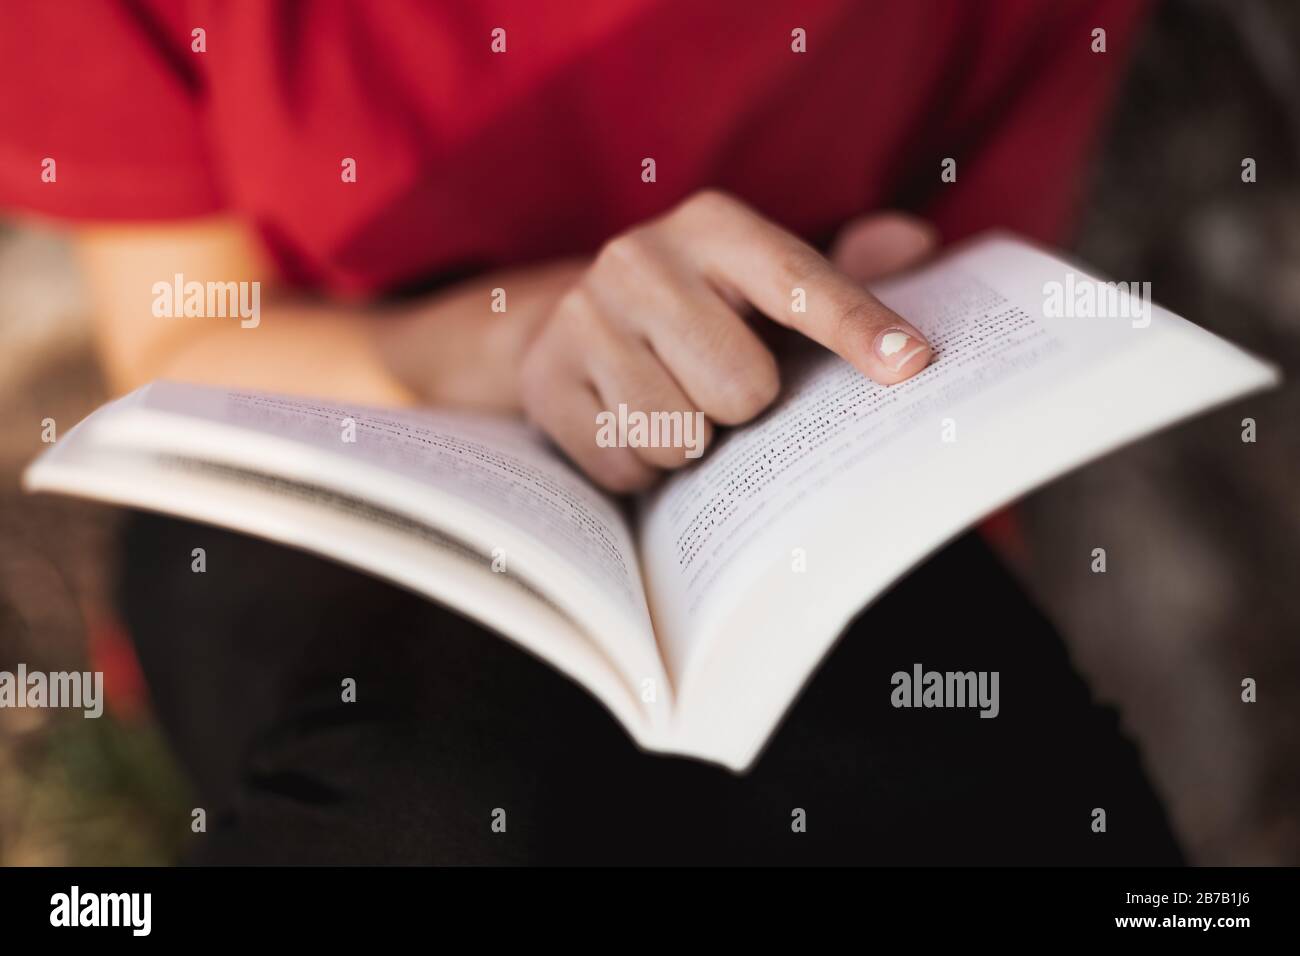 Close up of a open book right in the middle by a young female who is pointing her finger in a word of the page. Low depth of field. Stock Photo